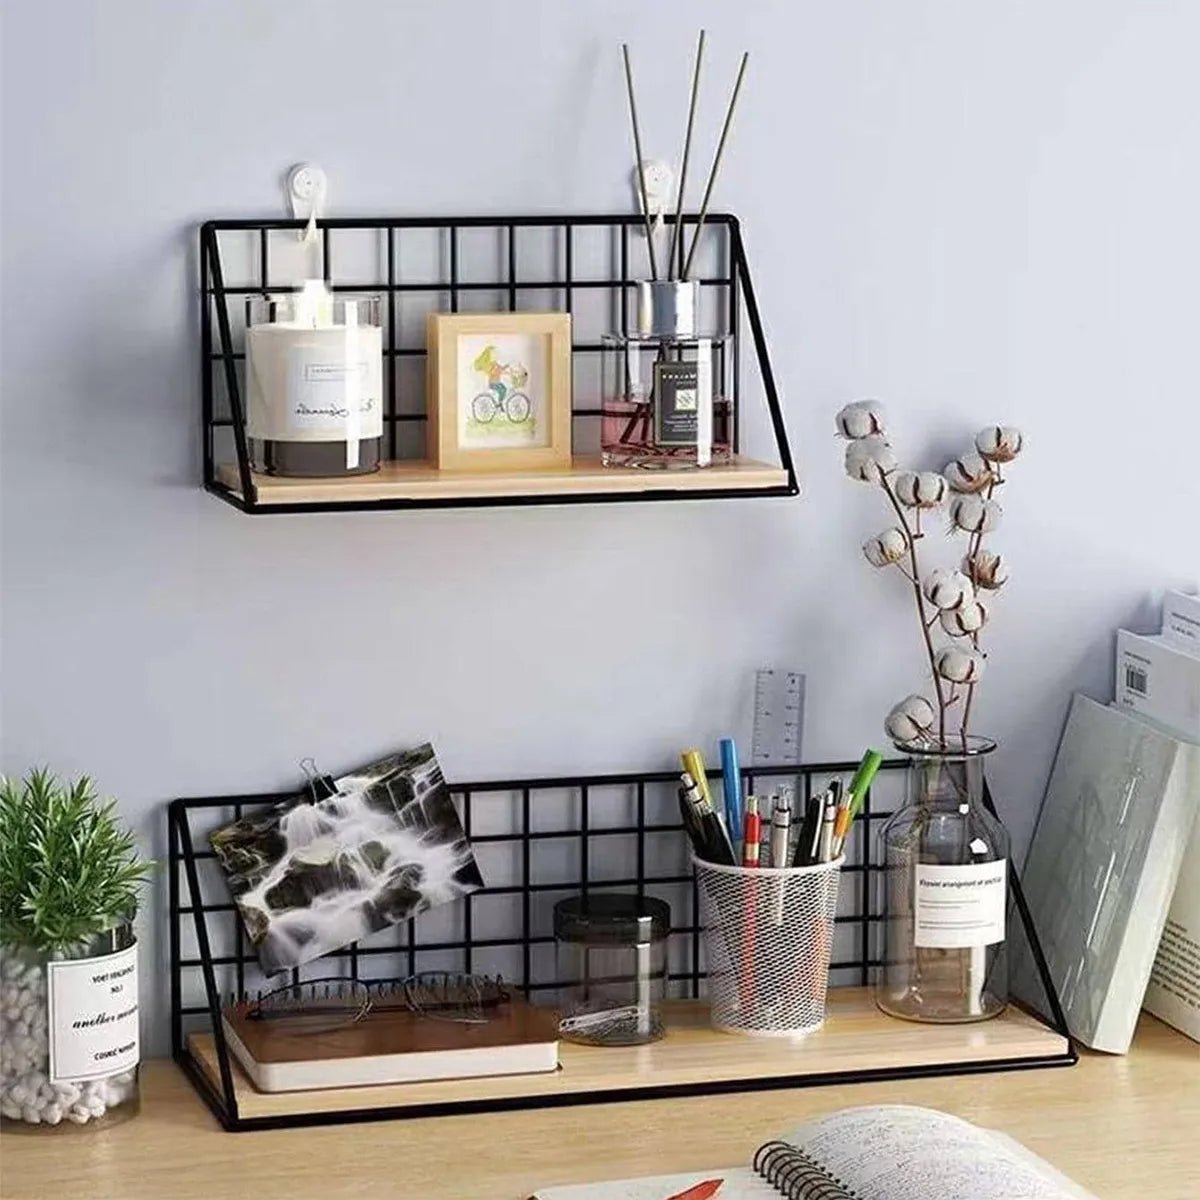 Wall Mounted Industrial Hanging Shelf - The House Of BLOC